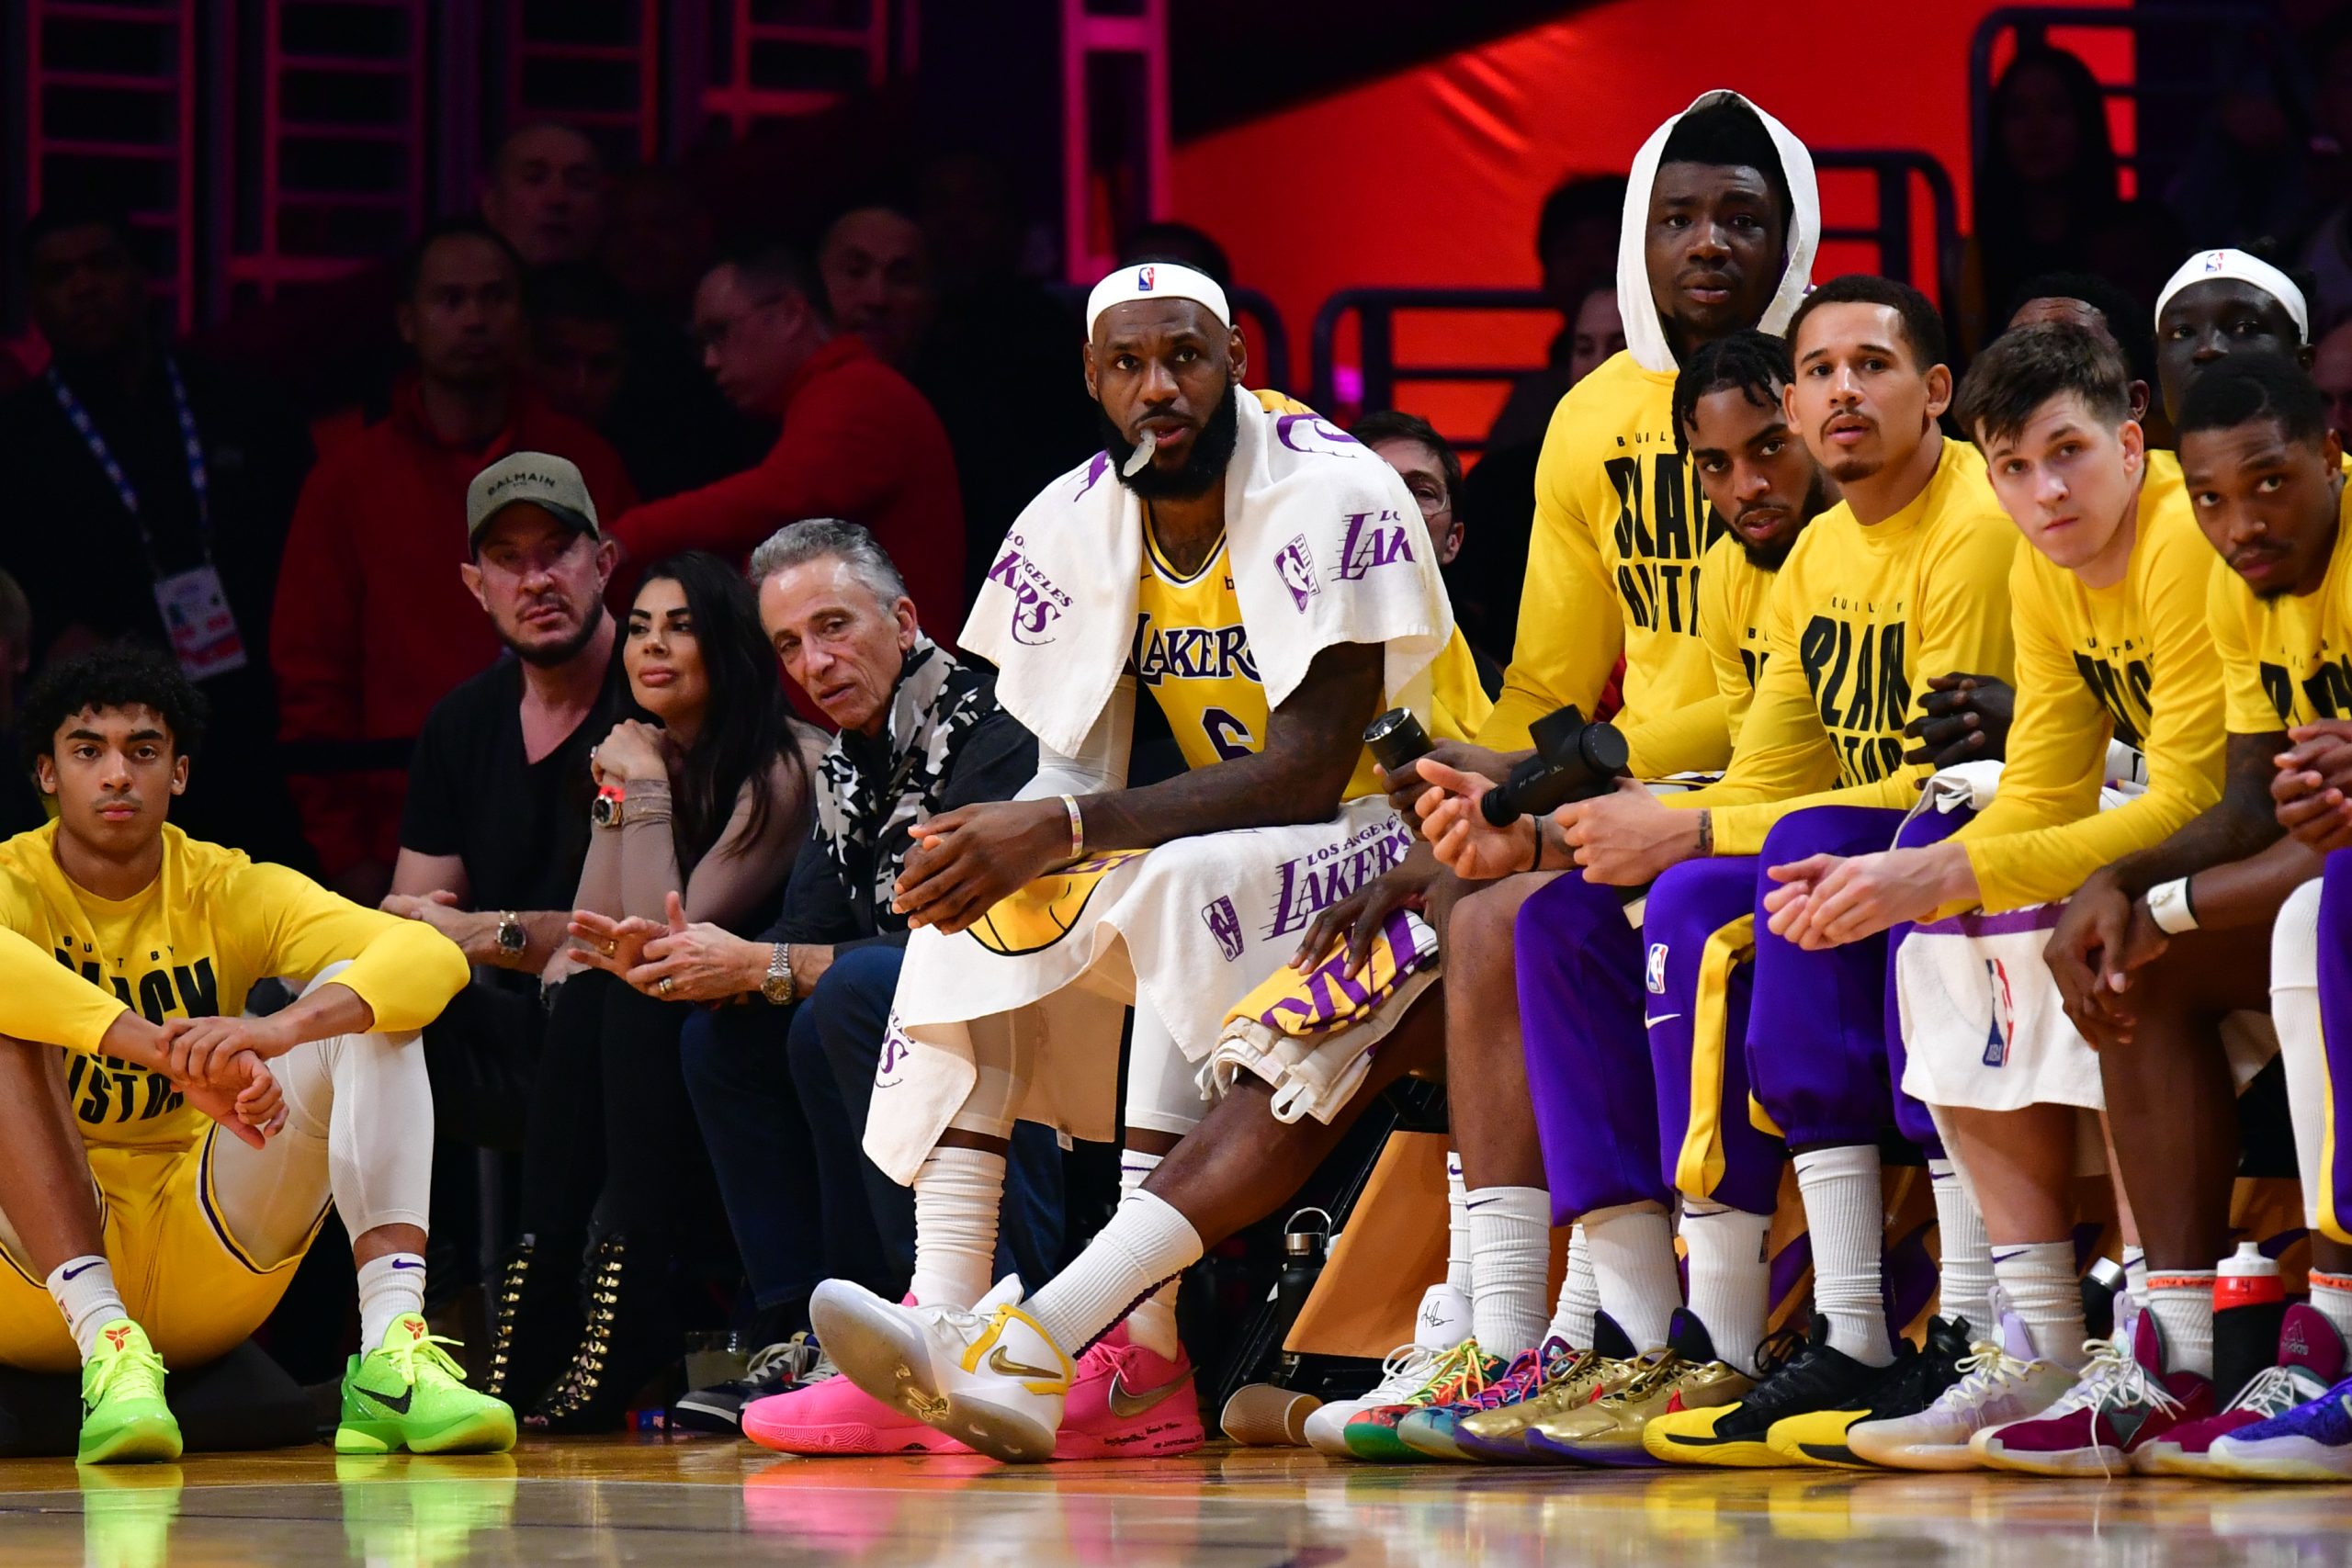 Feb 7, 2023; Los Angeles, California, USA; Los Angeles Lakers forward LeBron James (6) watches from the bench in the second quarter against the Oklahoma City Thunder at Crypto.com Arena. Mandatory Credit: Gary A. Vasquez-USA TODAY Sports